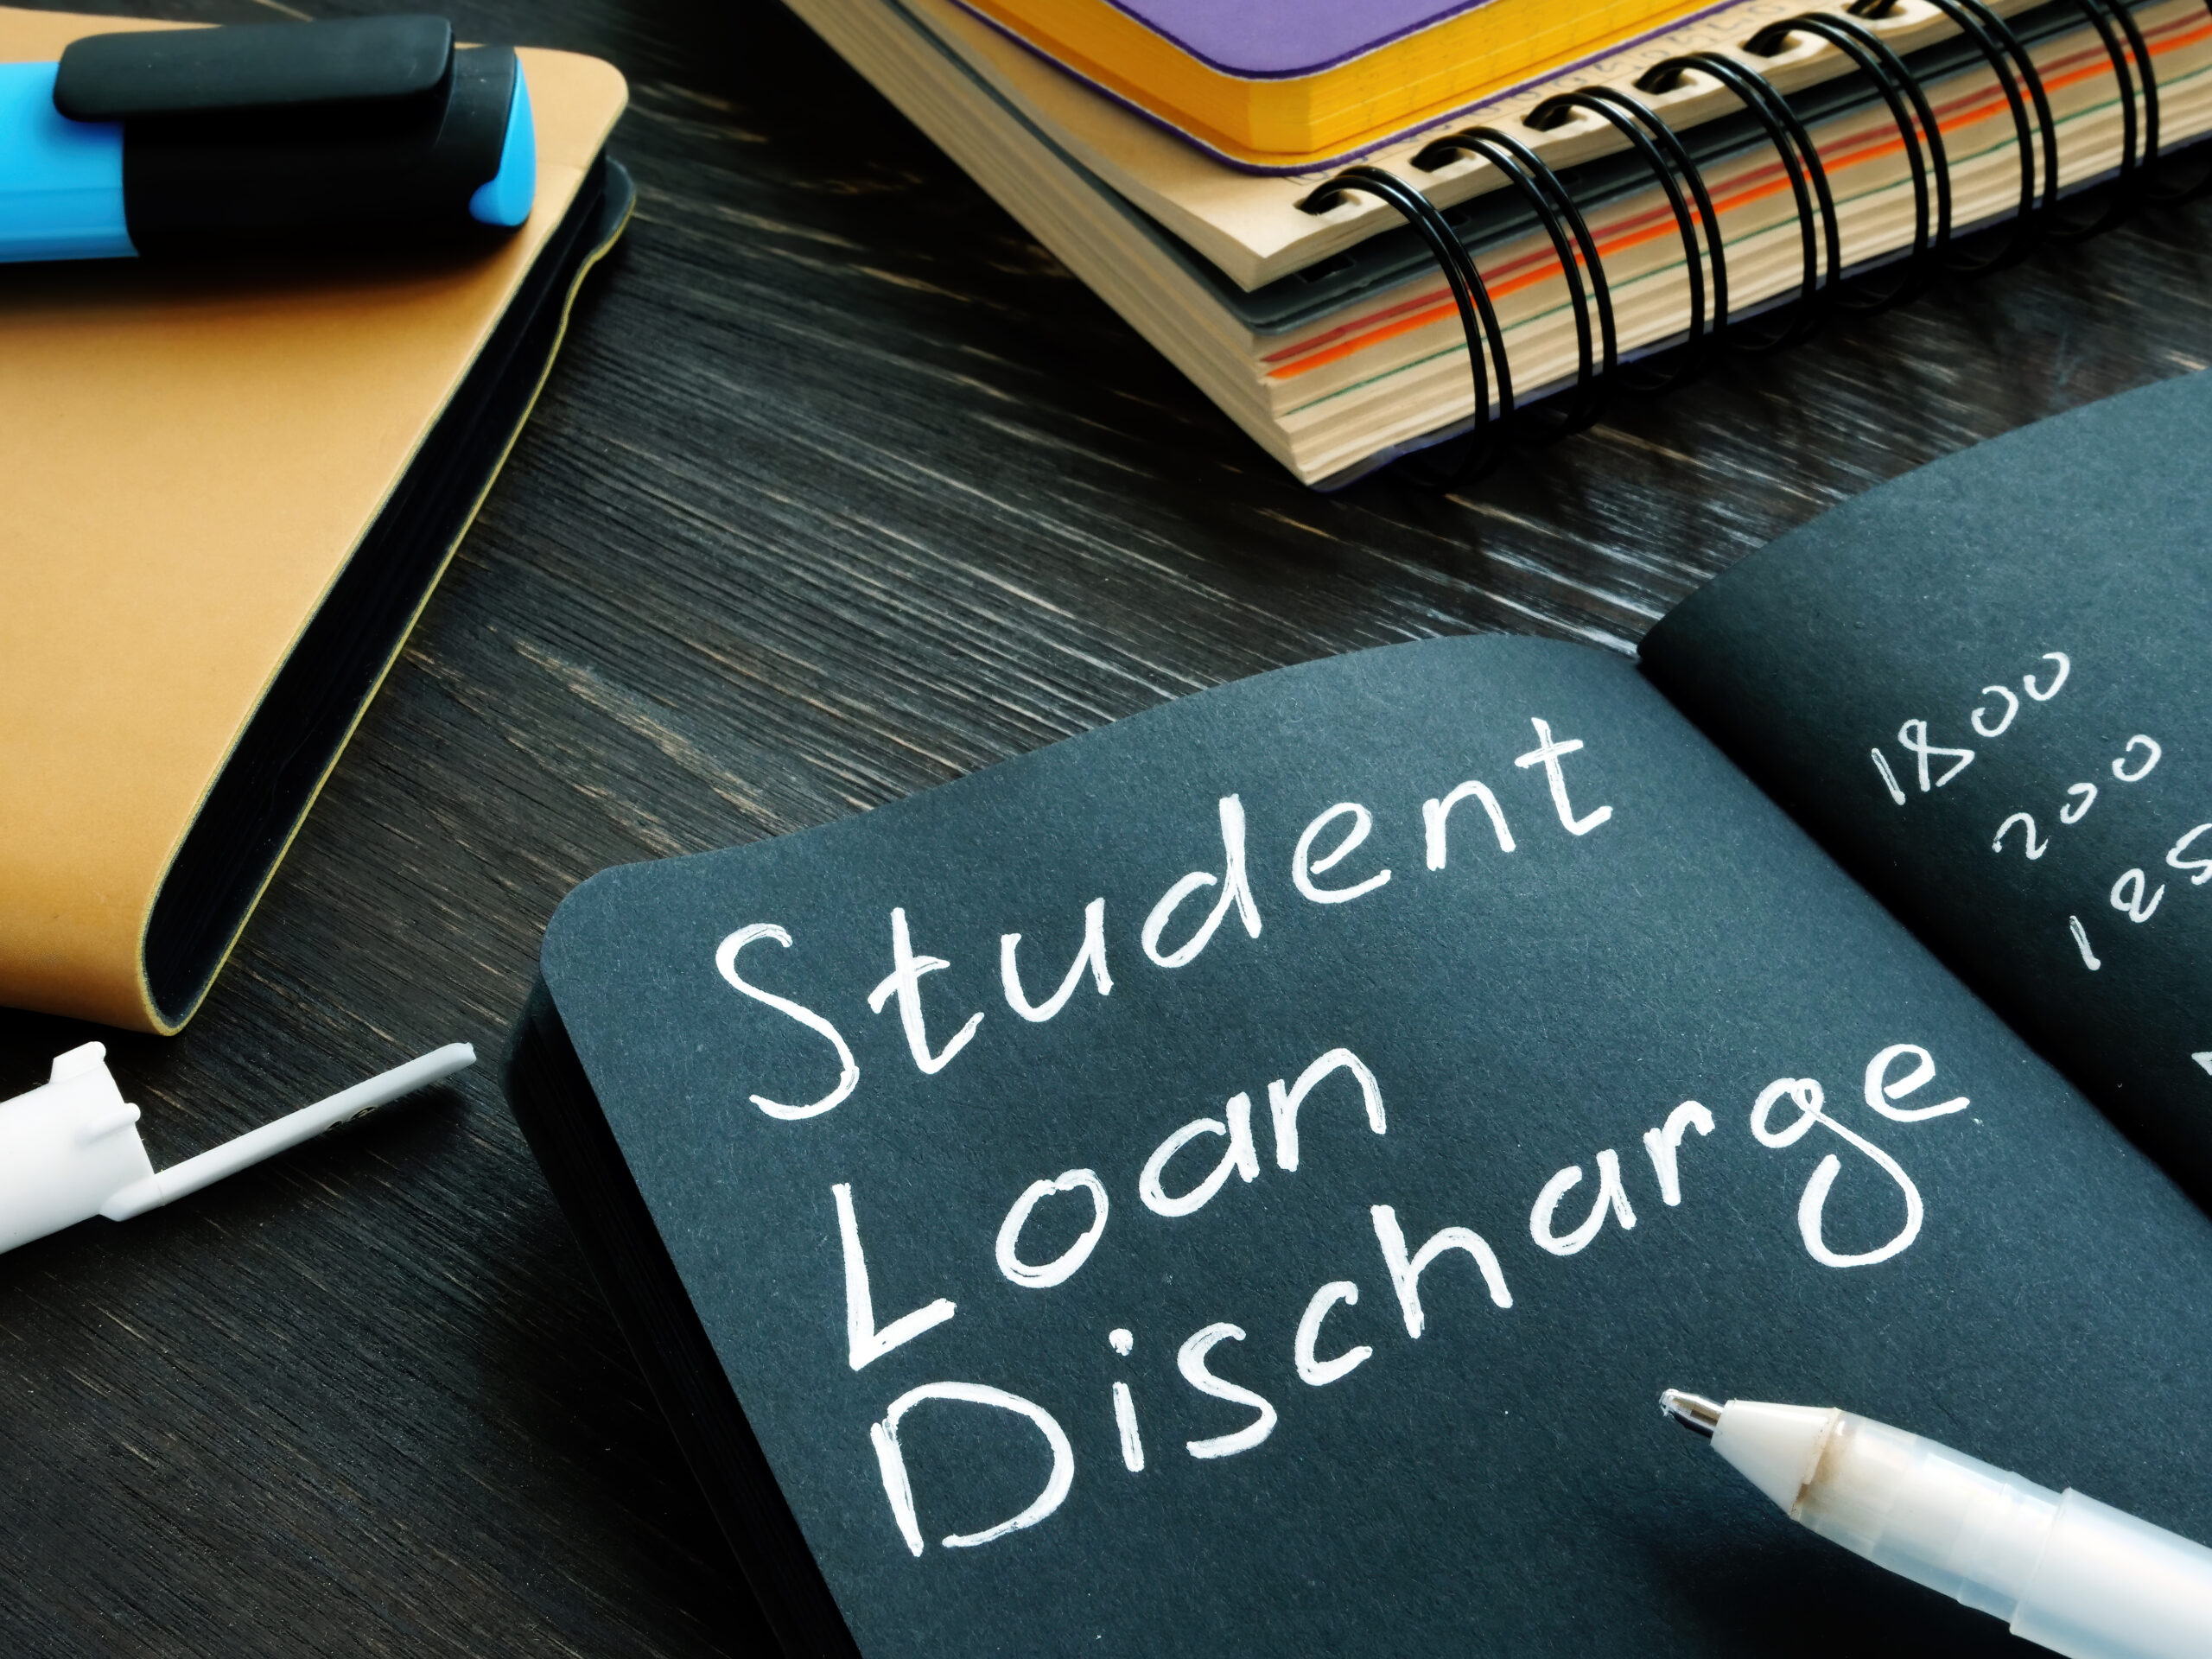 New Guidelines Make It Easier To Discharge Student Loan Debt in Bankruptcy